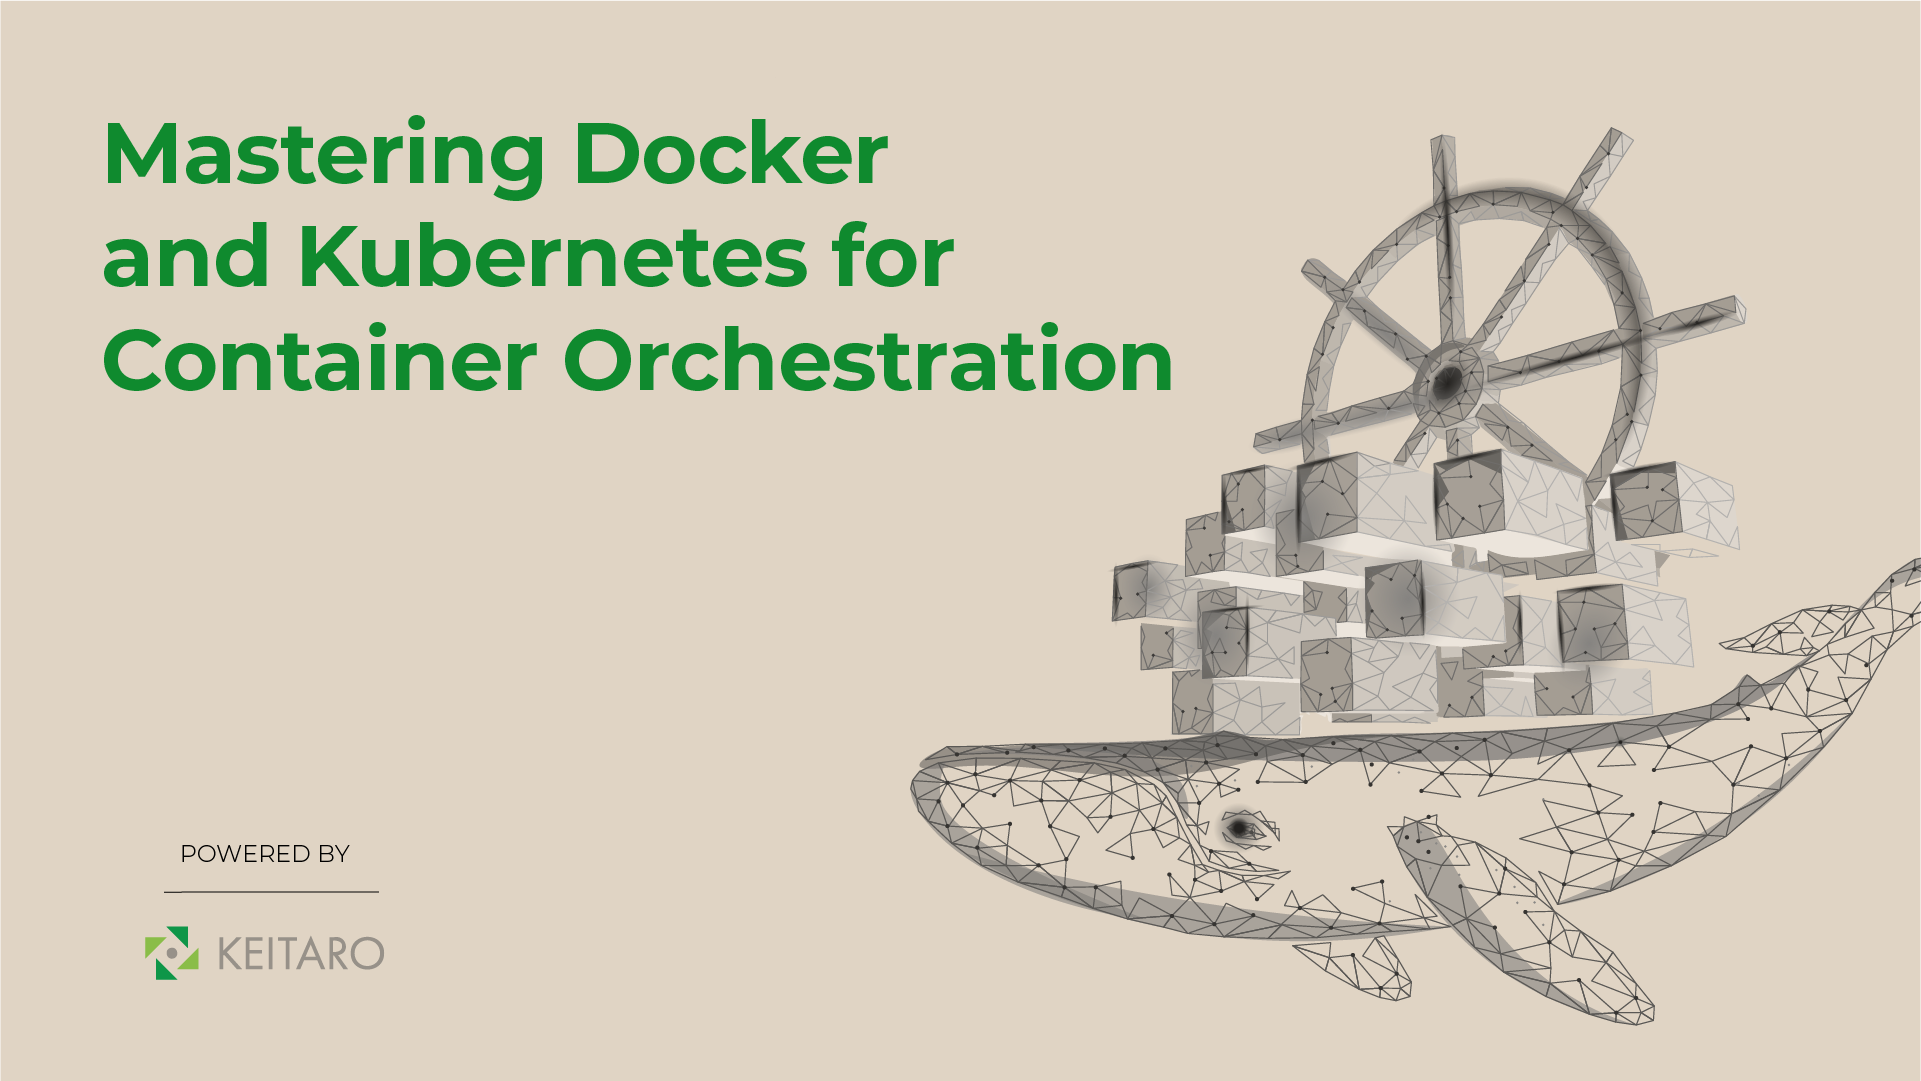 Mastering Docker and Kubernetes for Container Orchestration